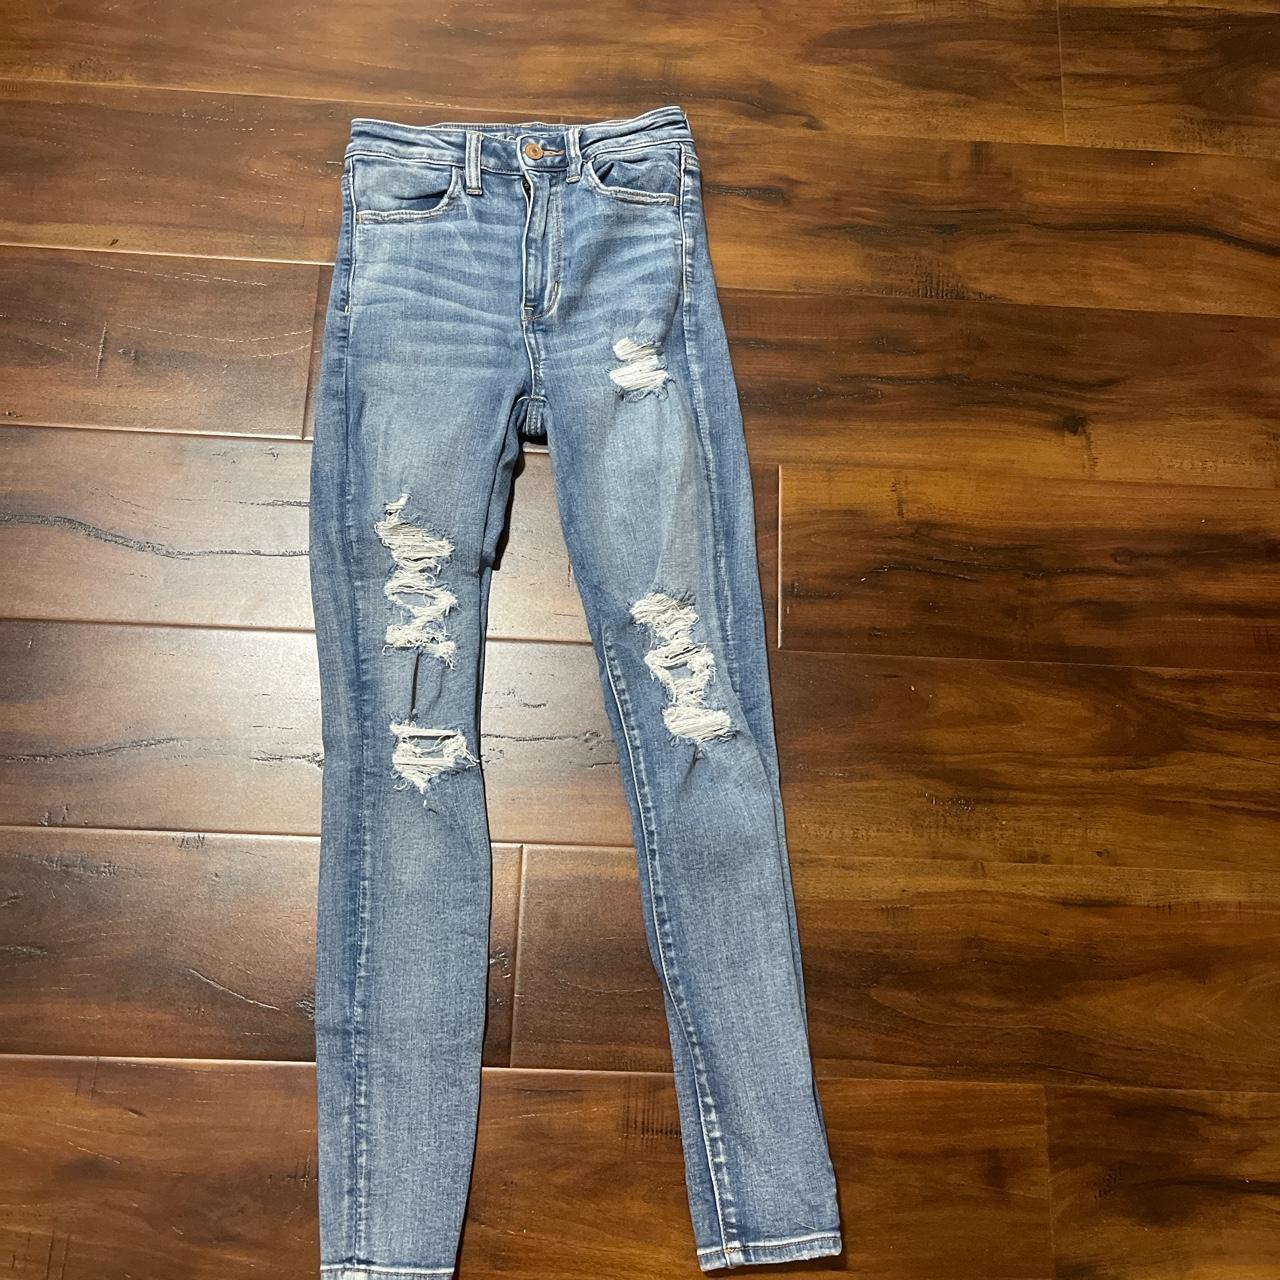 American Eagle Outfitters Womens Skinny Jeans Blue - Depop